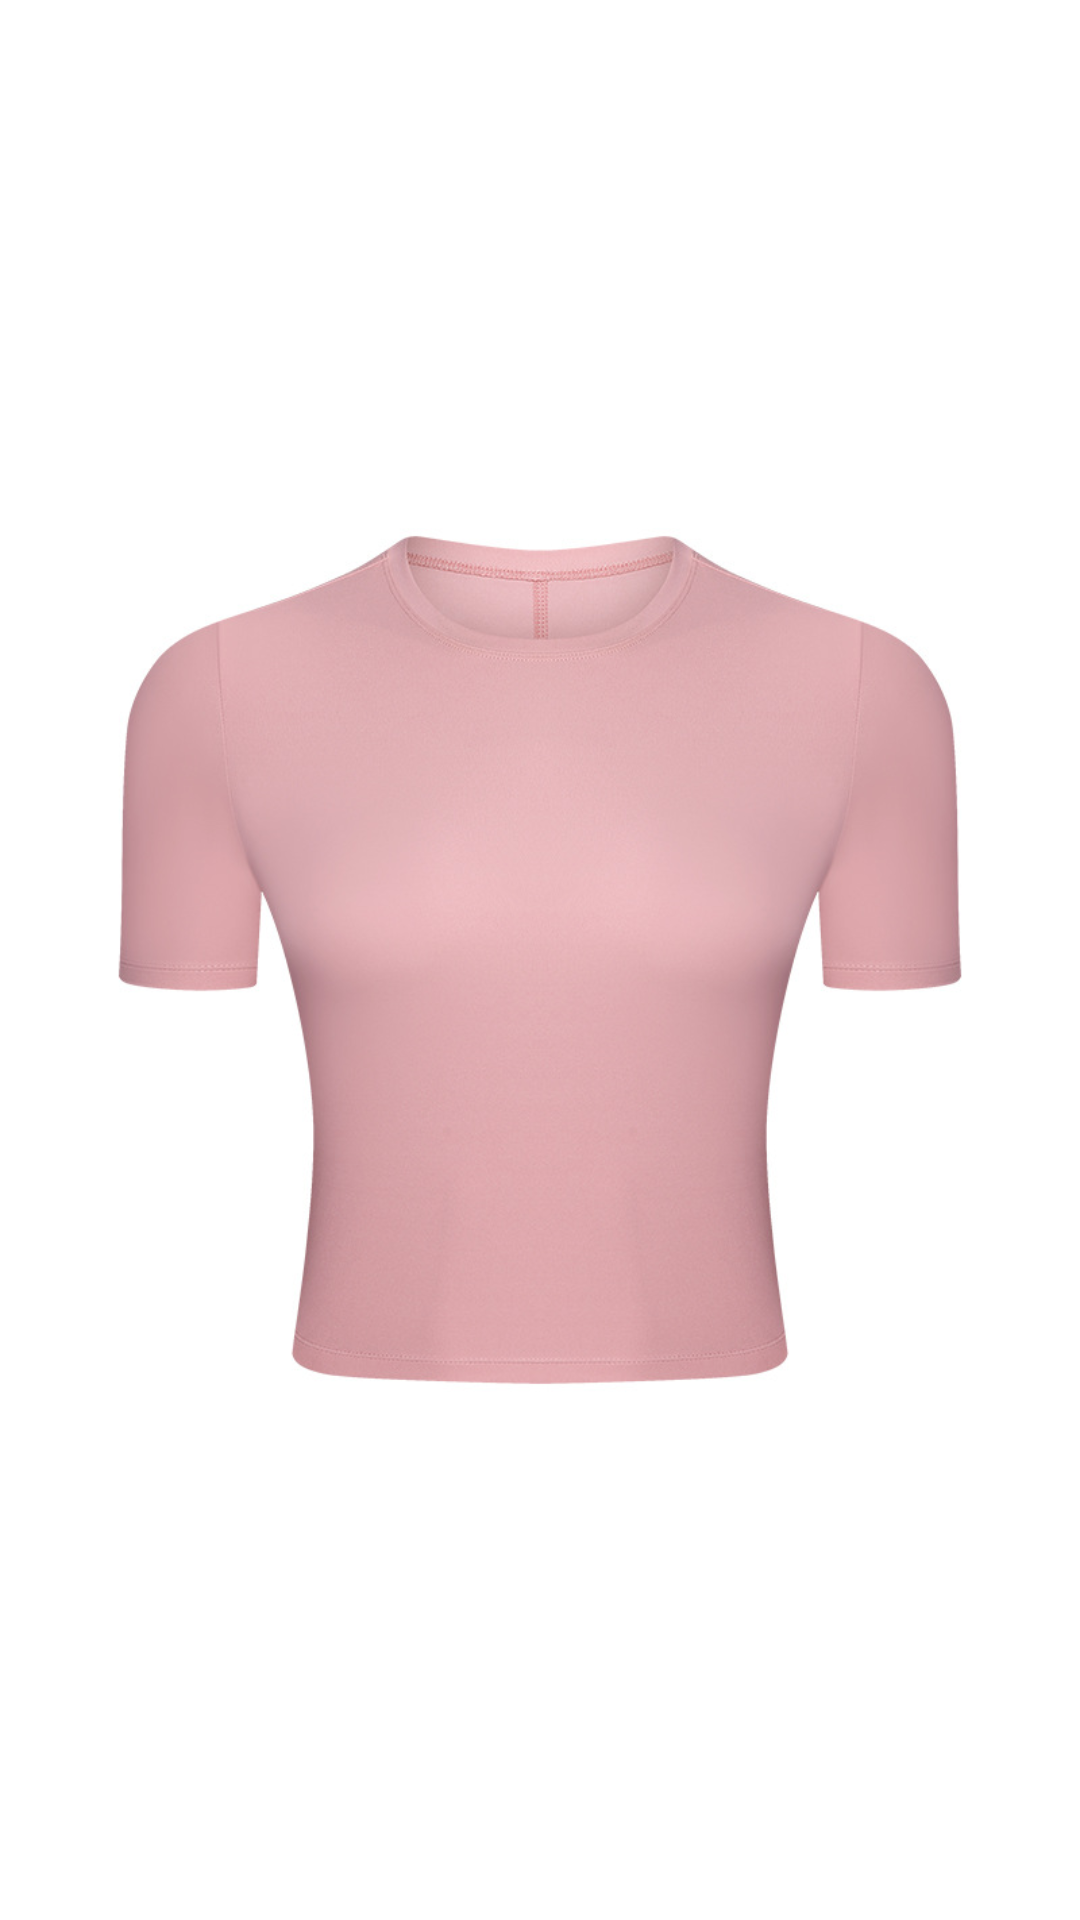 Tee - Baby Pink